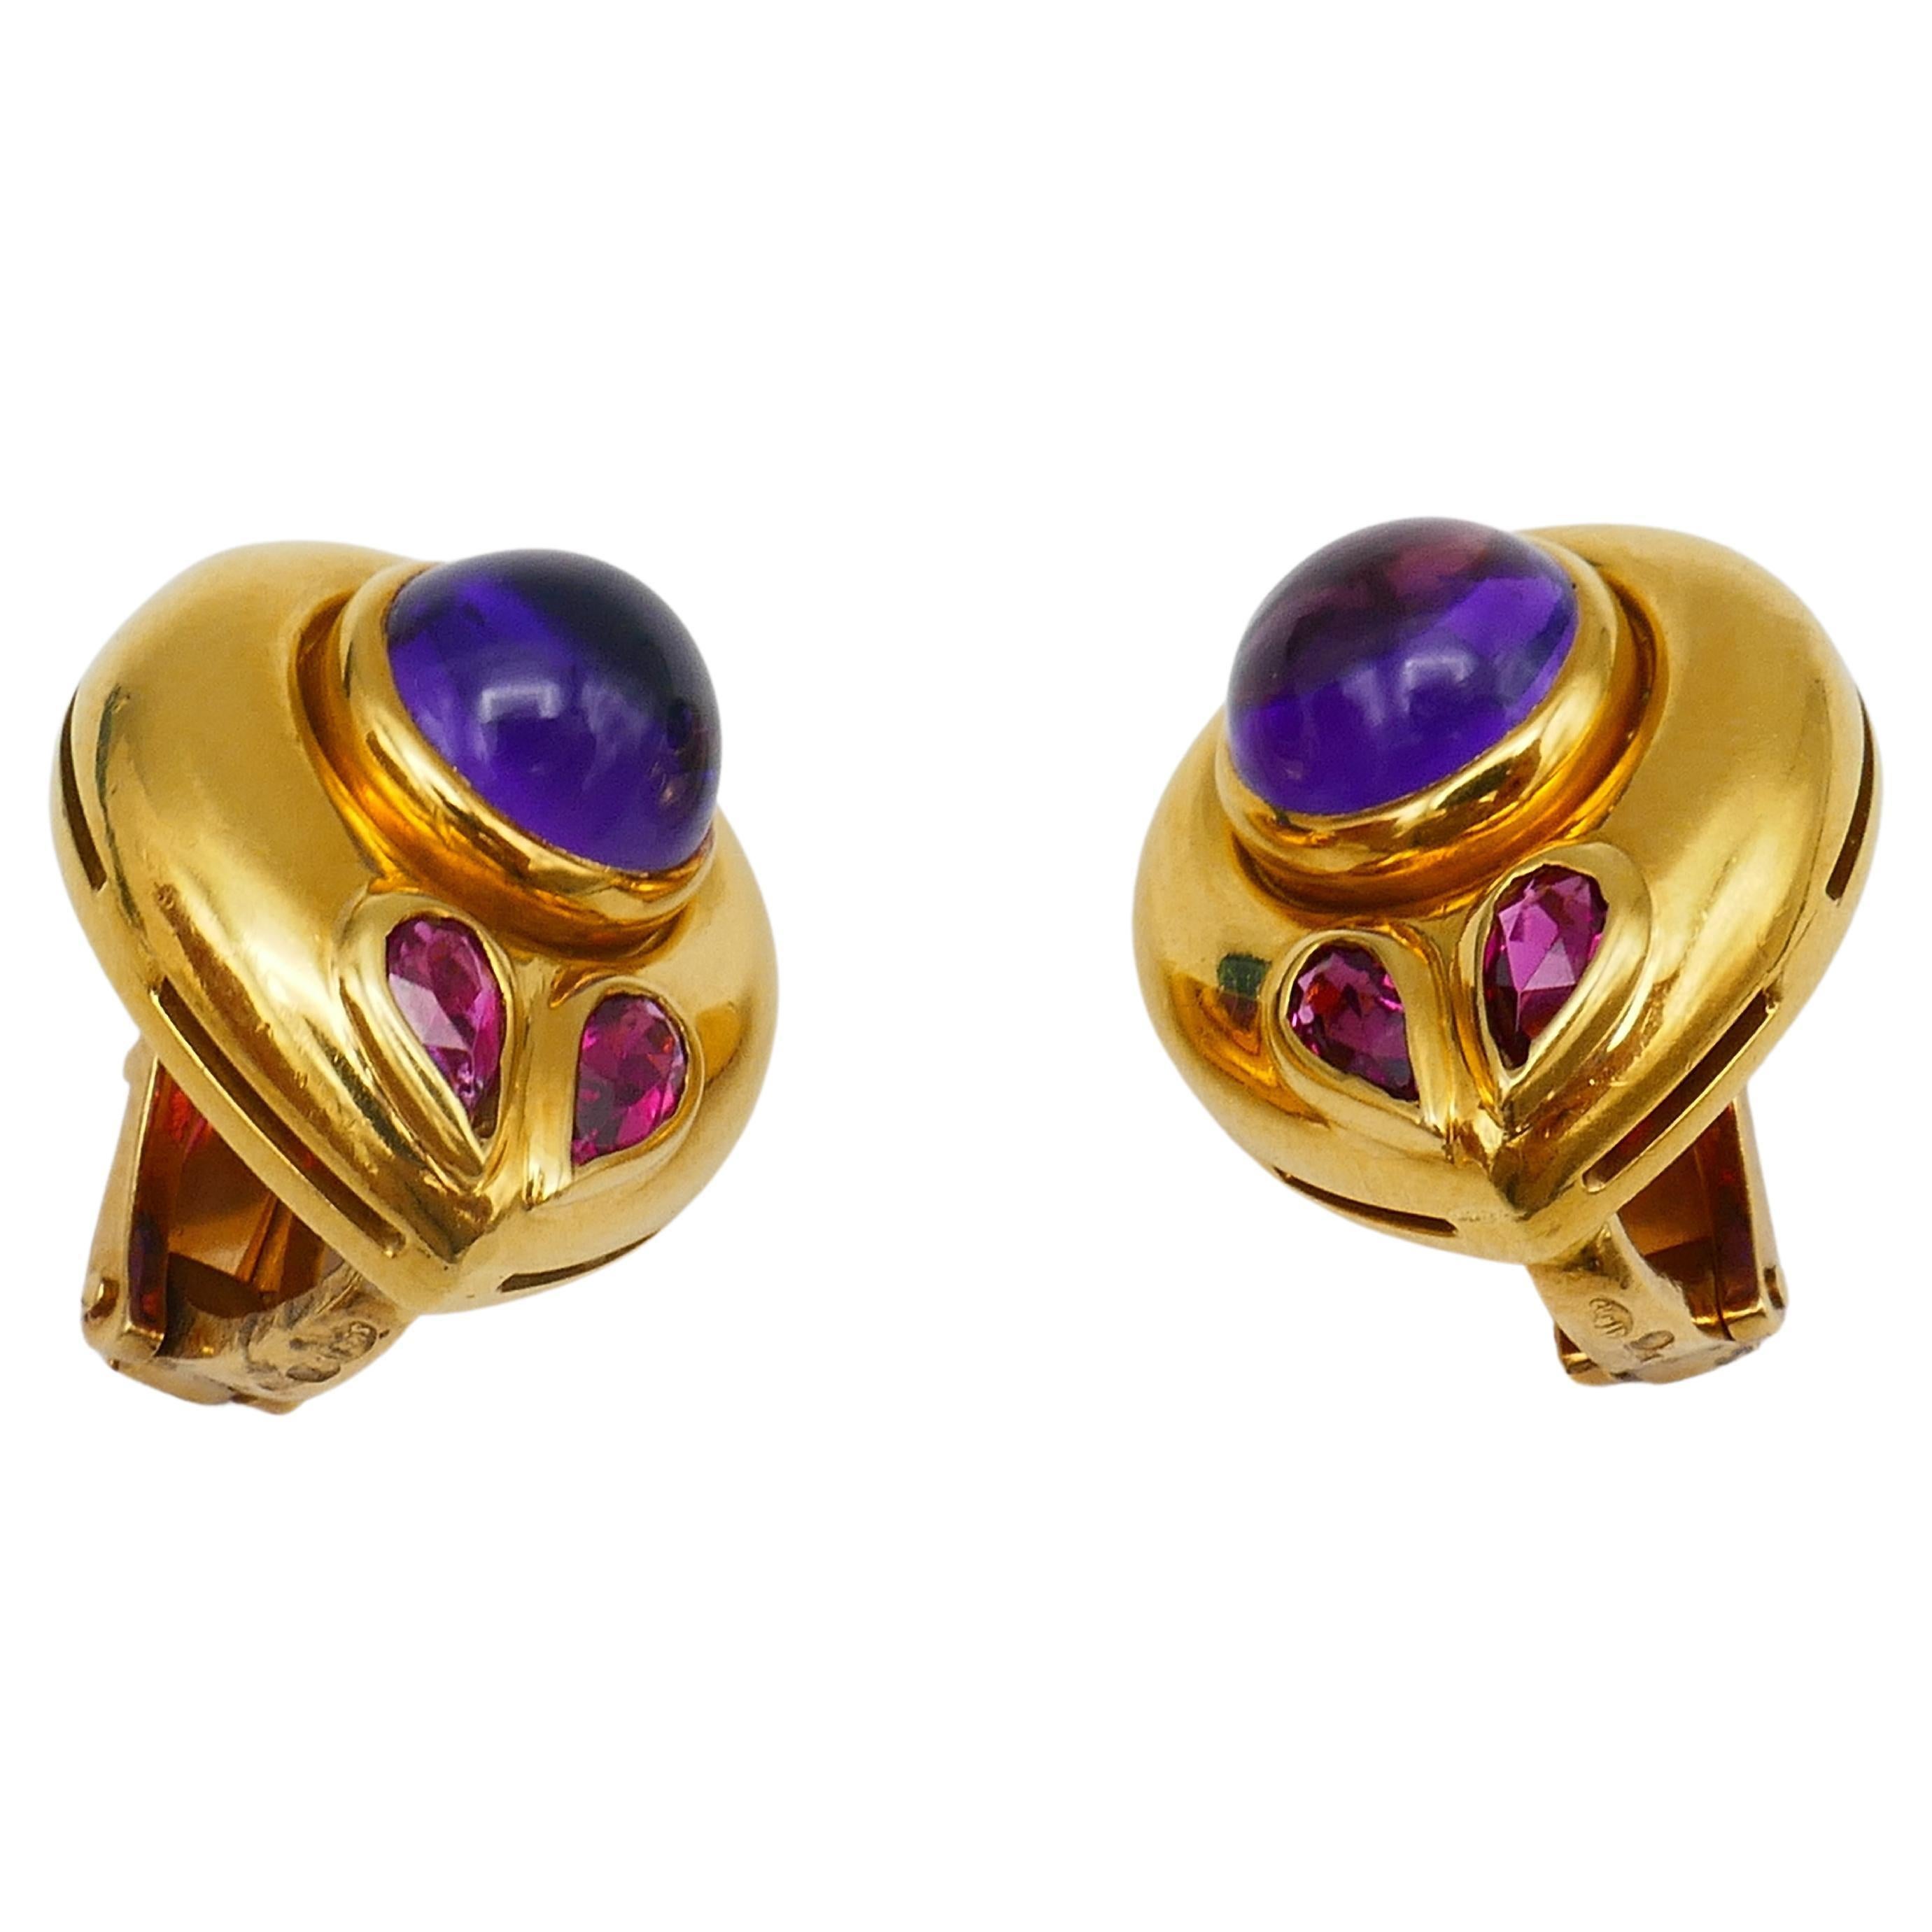 A cute pair of clip-on vintage Bulgari earrings. Made of 18k gold, featuring cabochon amethyst and pear shape tourmaline.
The amethyst's total carat weight is 4.41 carats, the tourmaline is 0.47 points.
The drop shape of the earrings looks very